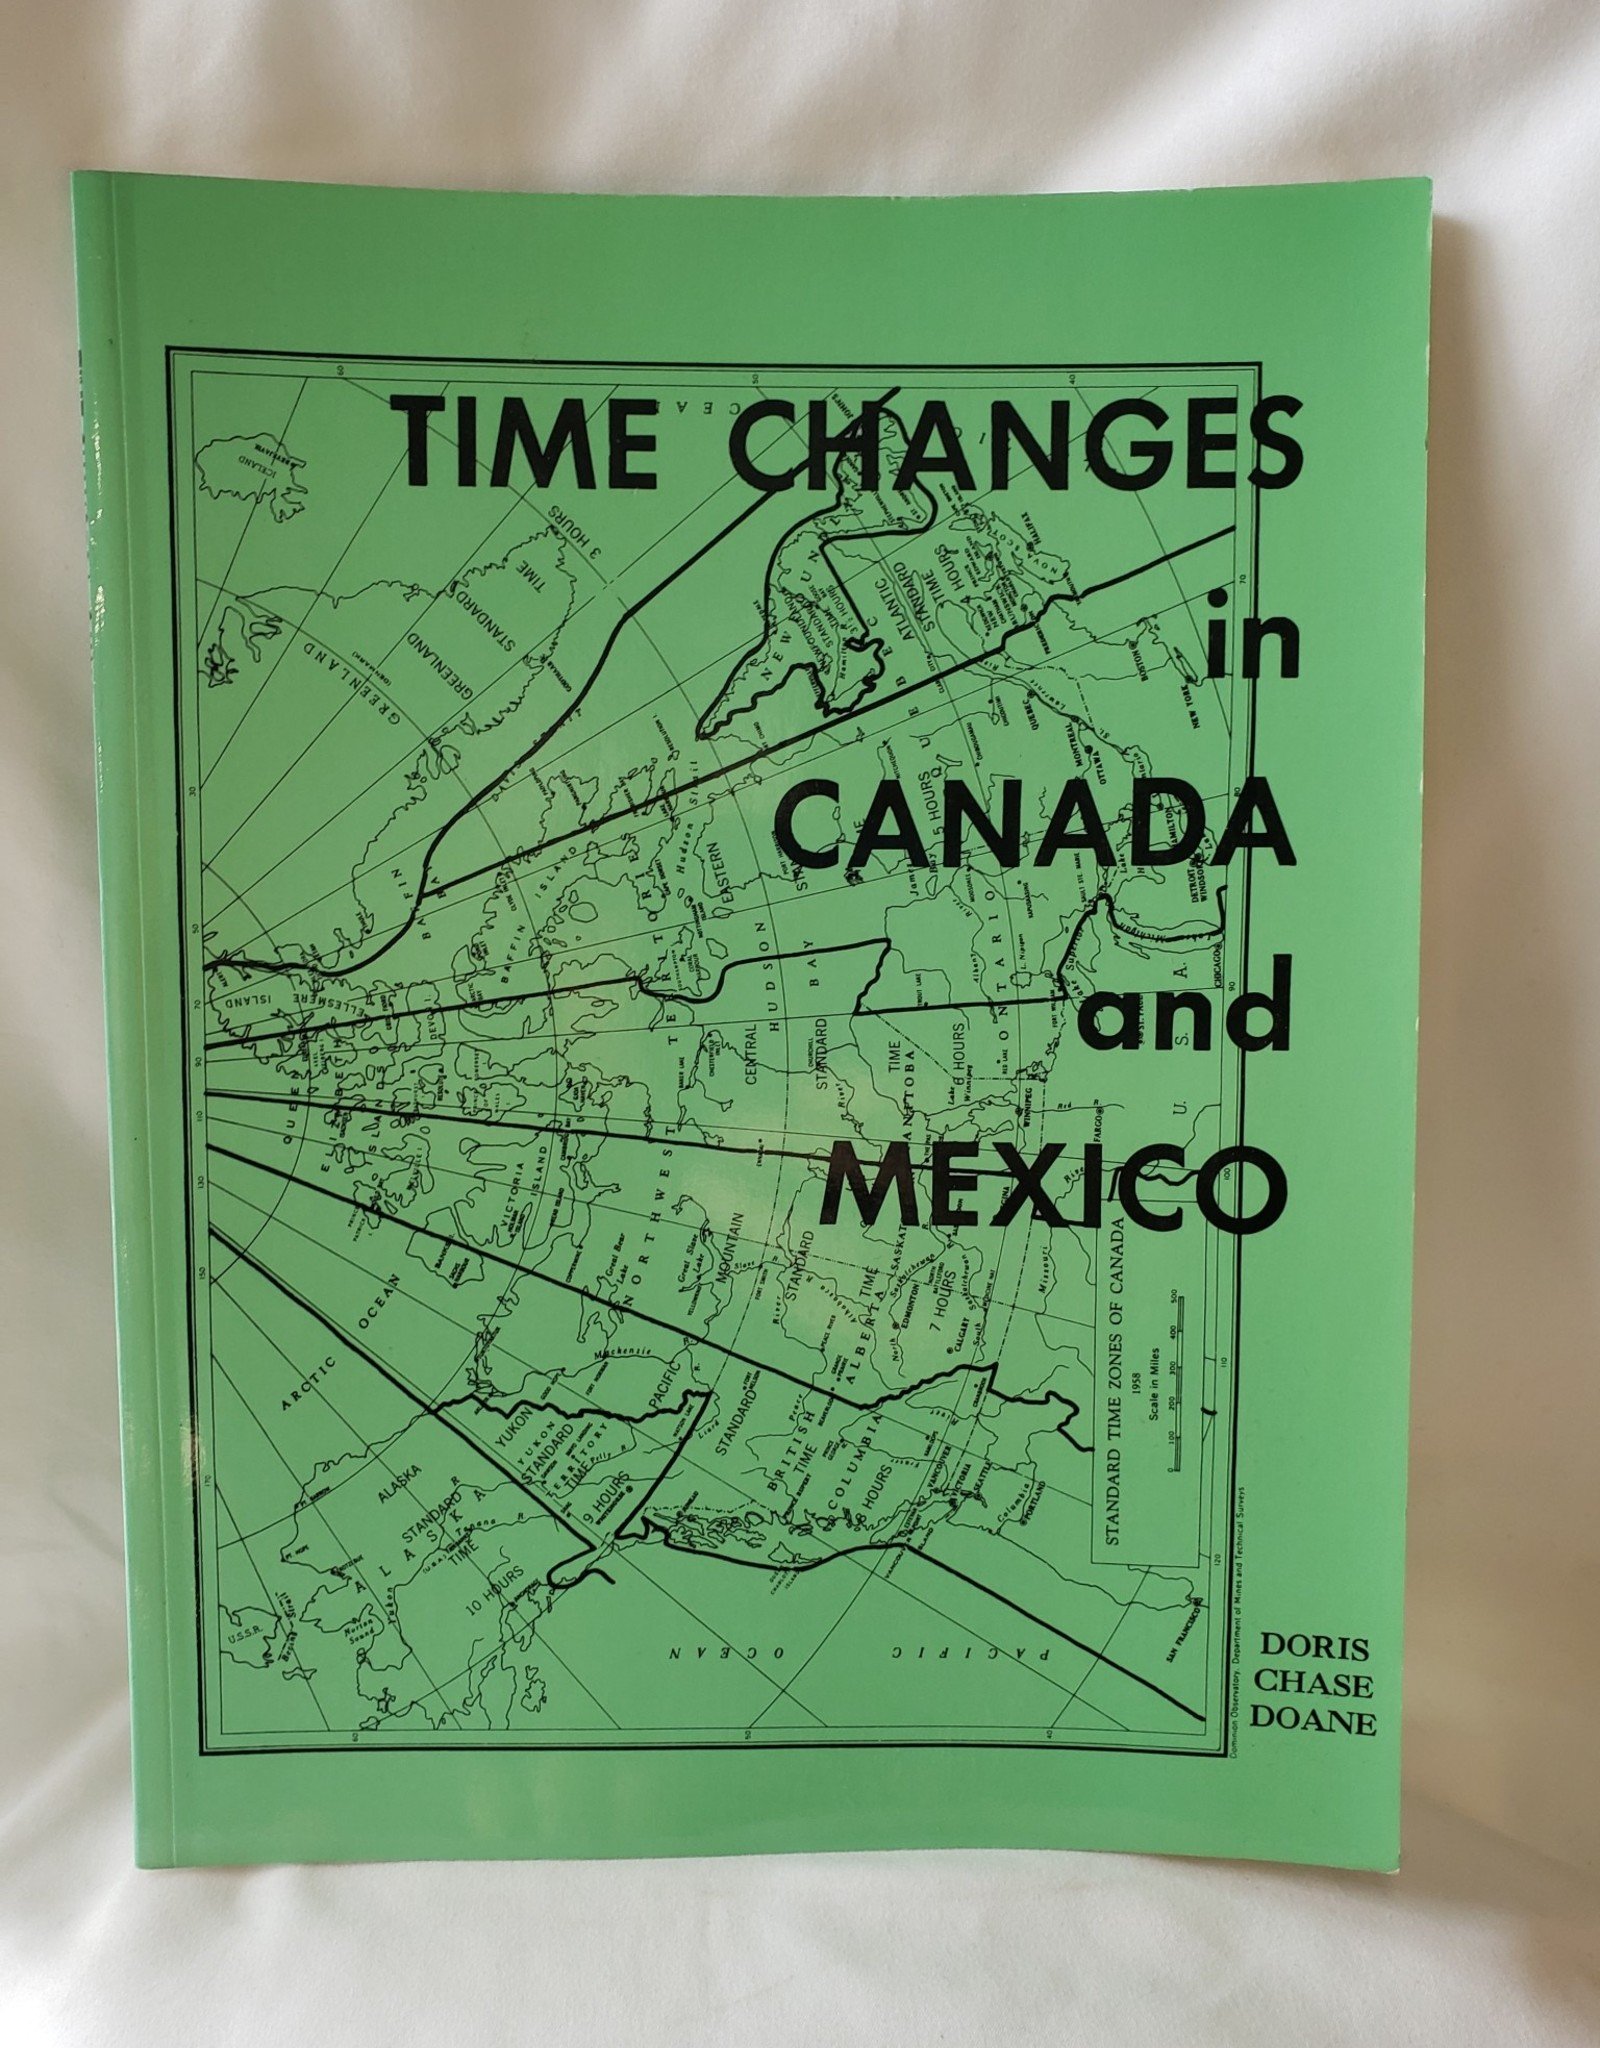 Time Changes In Canada And Mexico by Doris Chance Doane